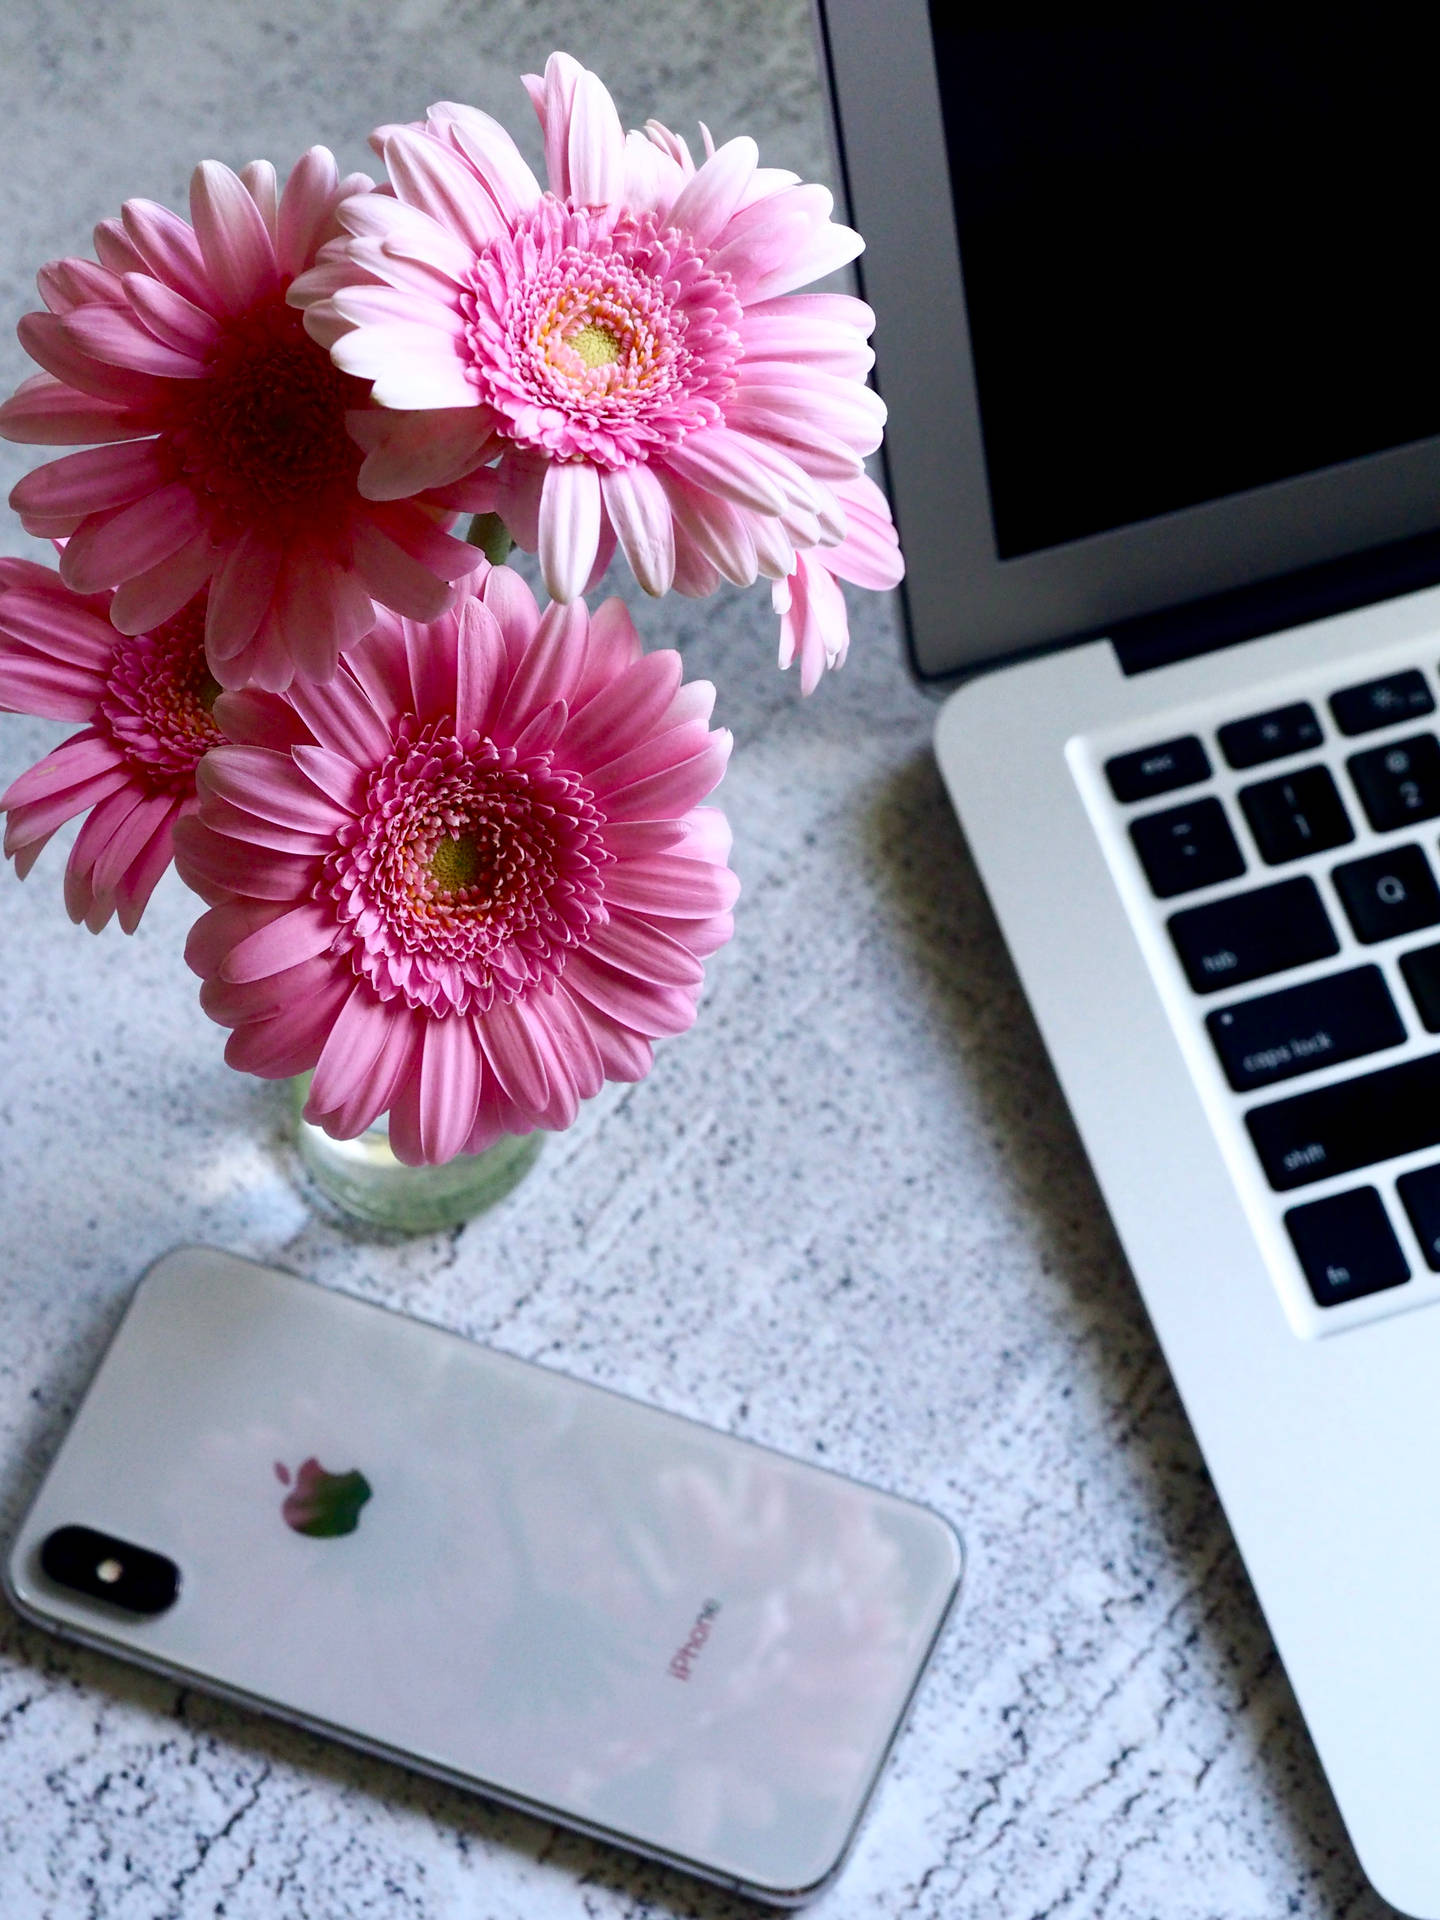 Iphone Desk With Pink Flowers Wallpaper